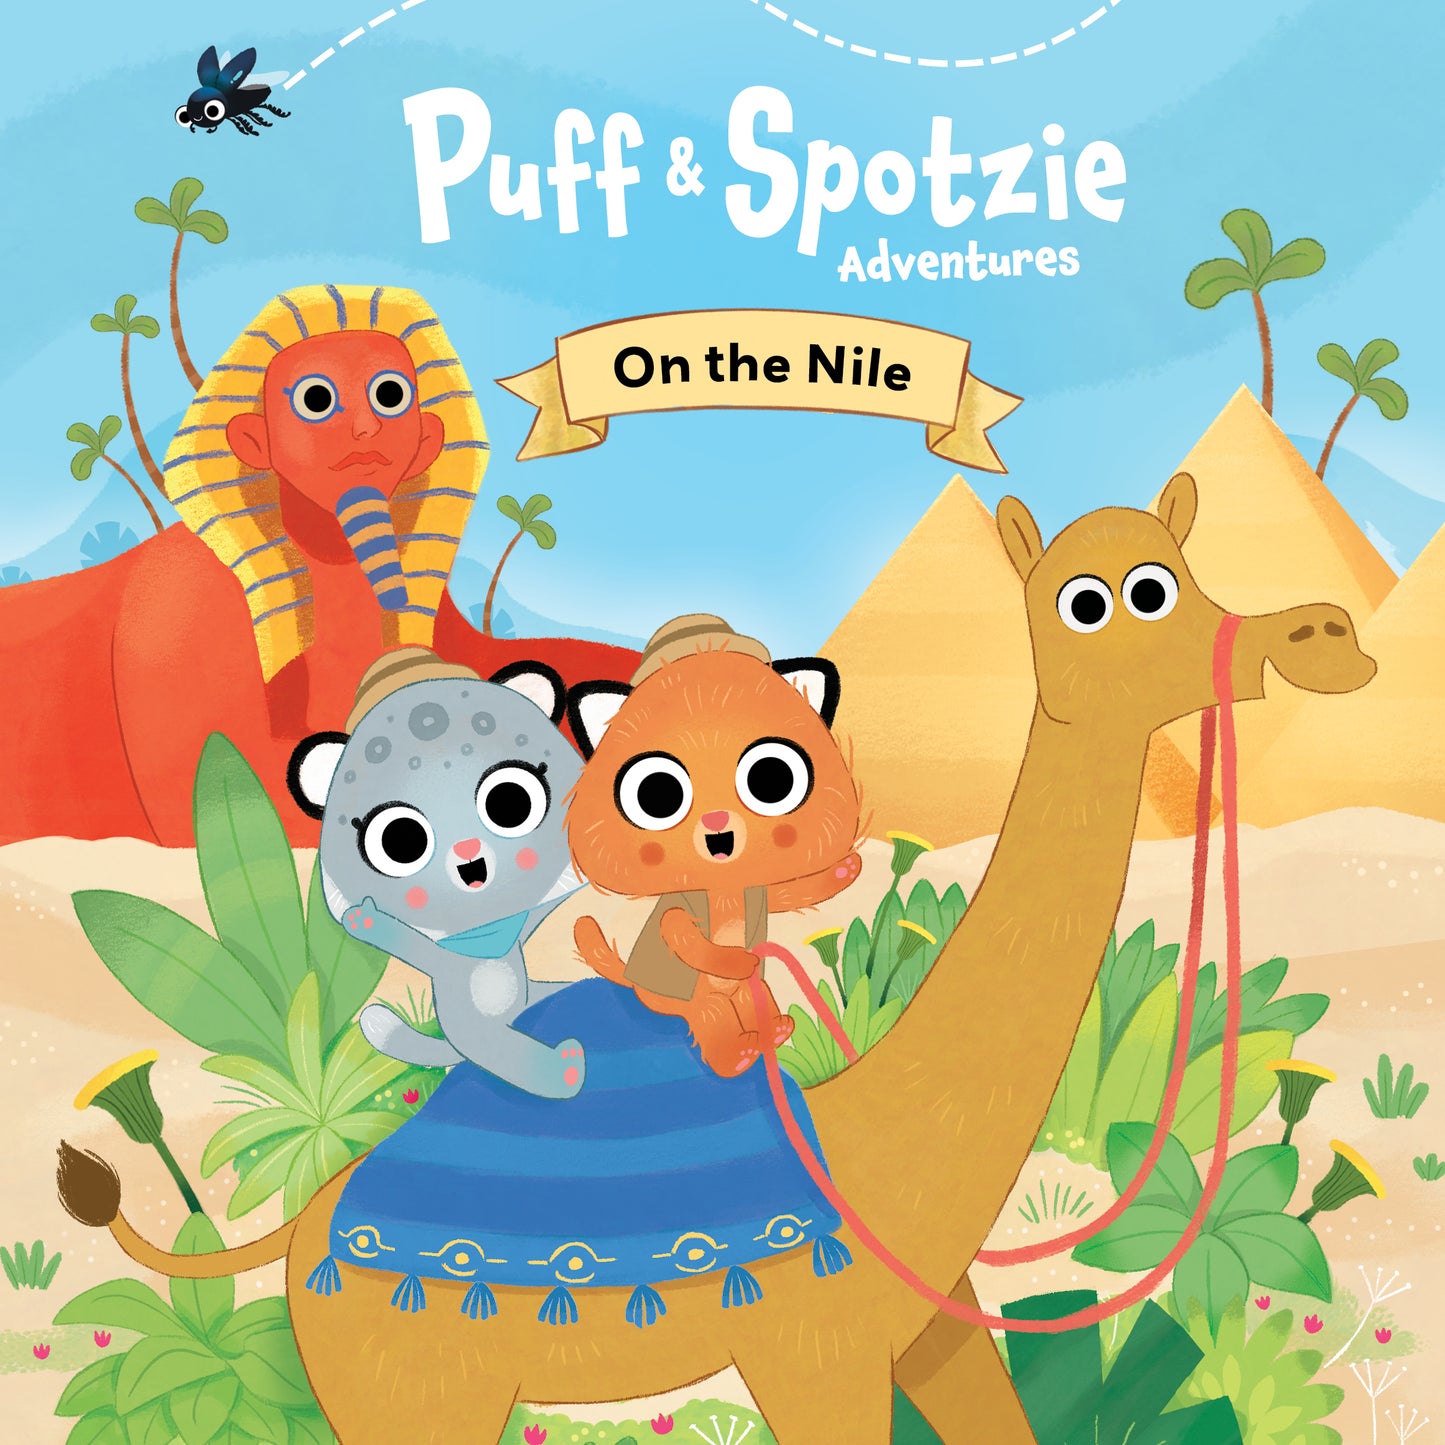 Puff & Spotzie Adventures On the Nile